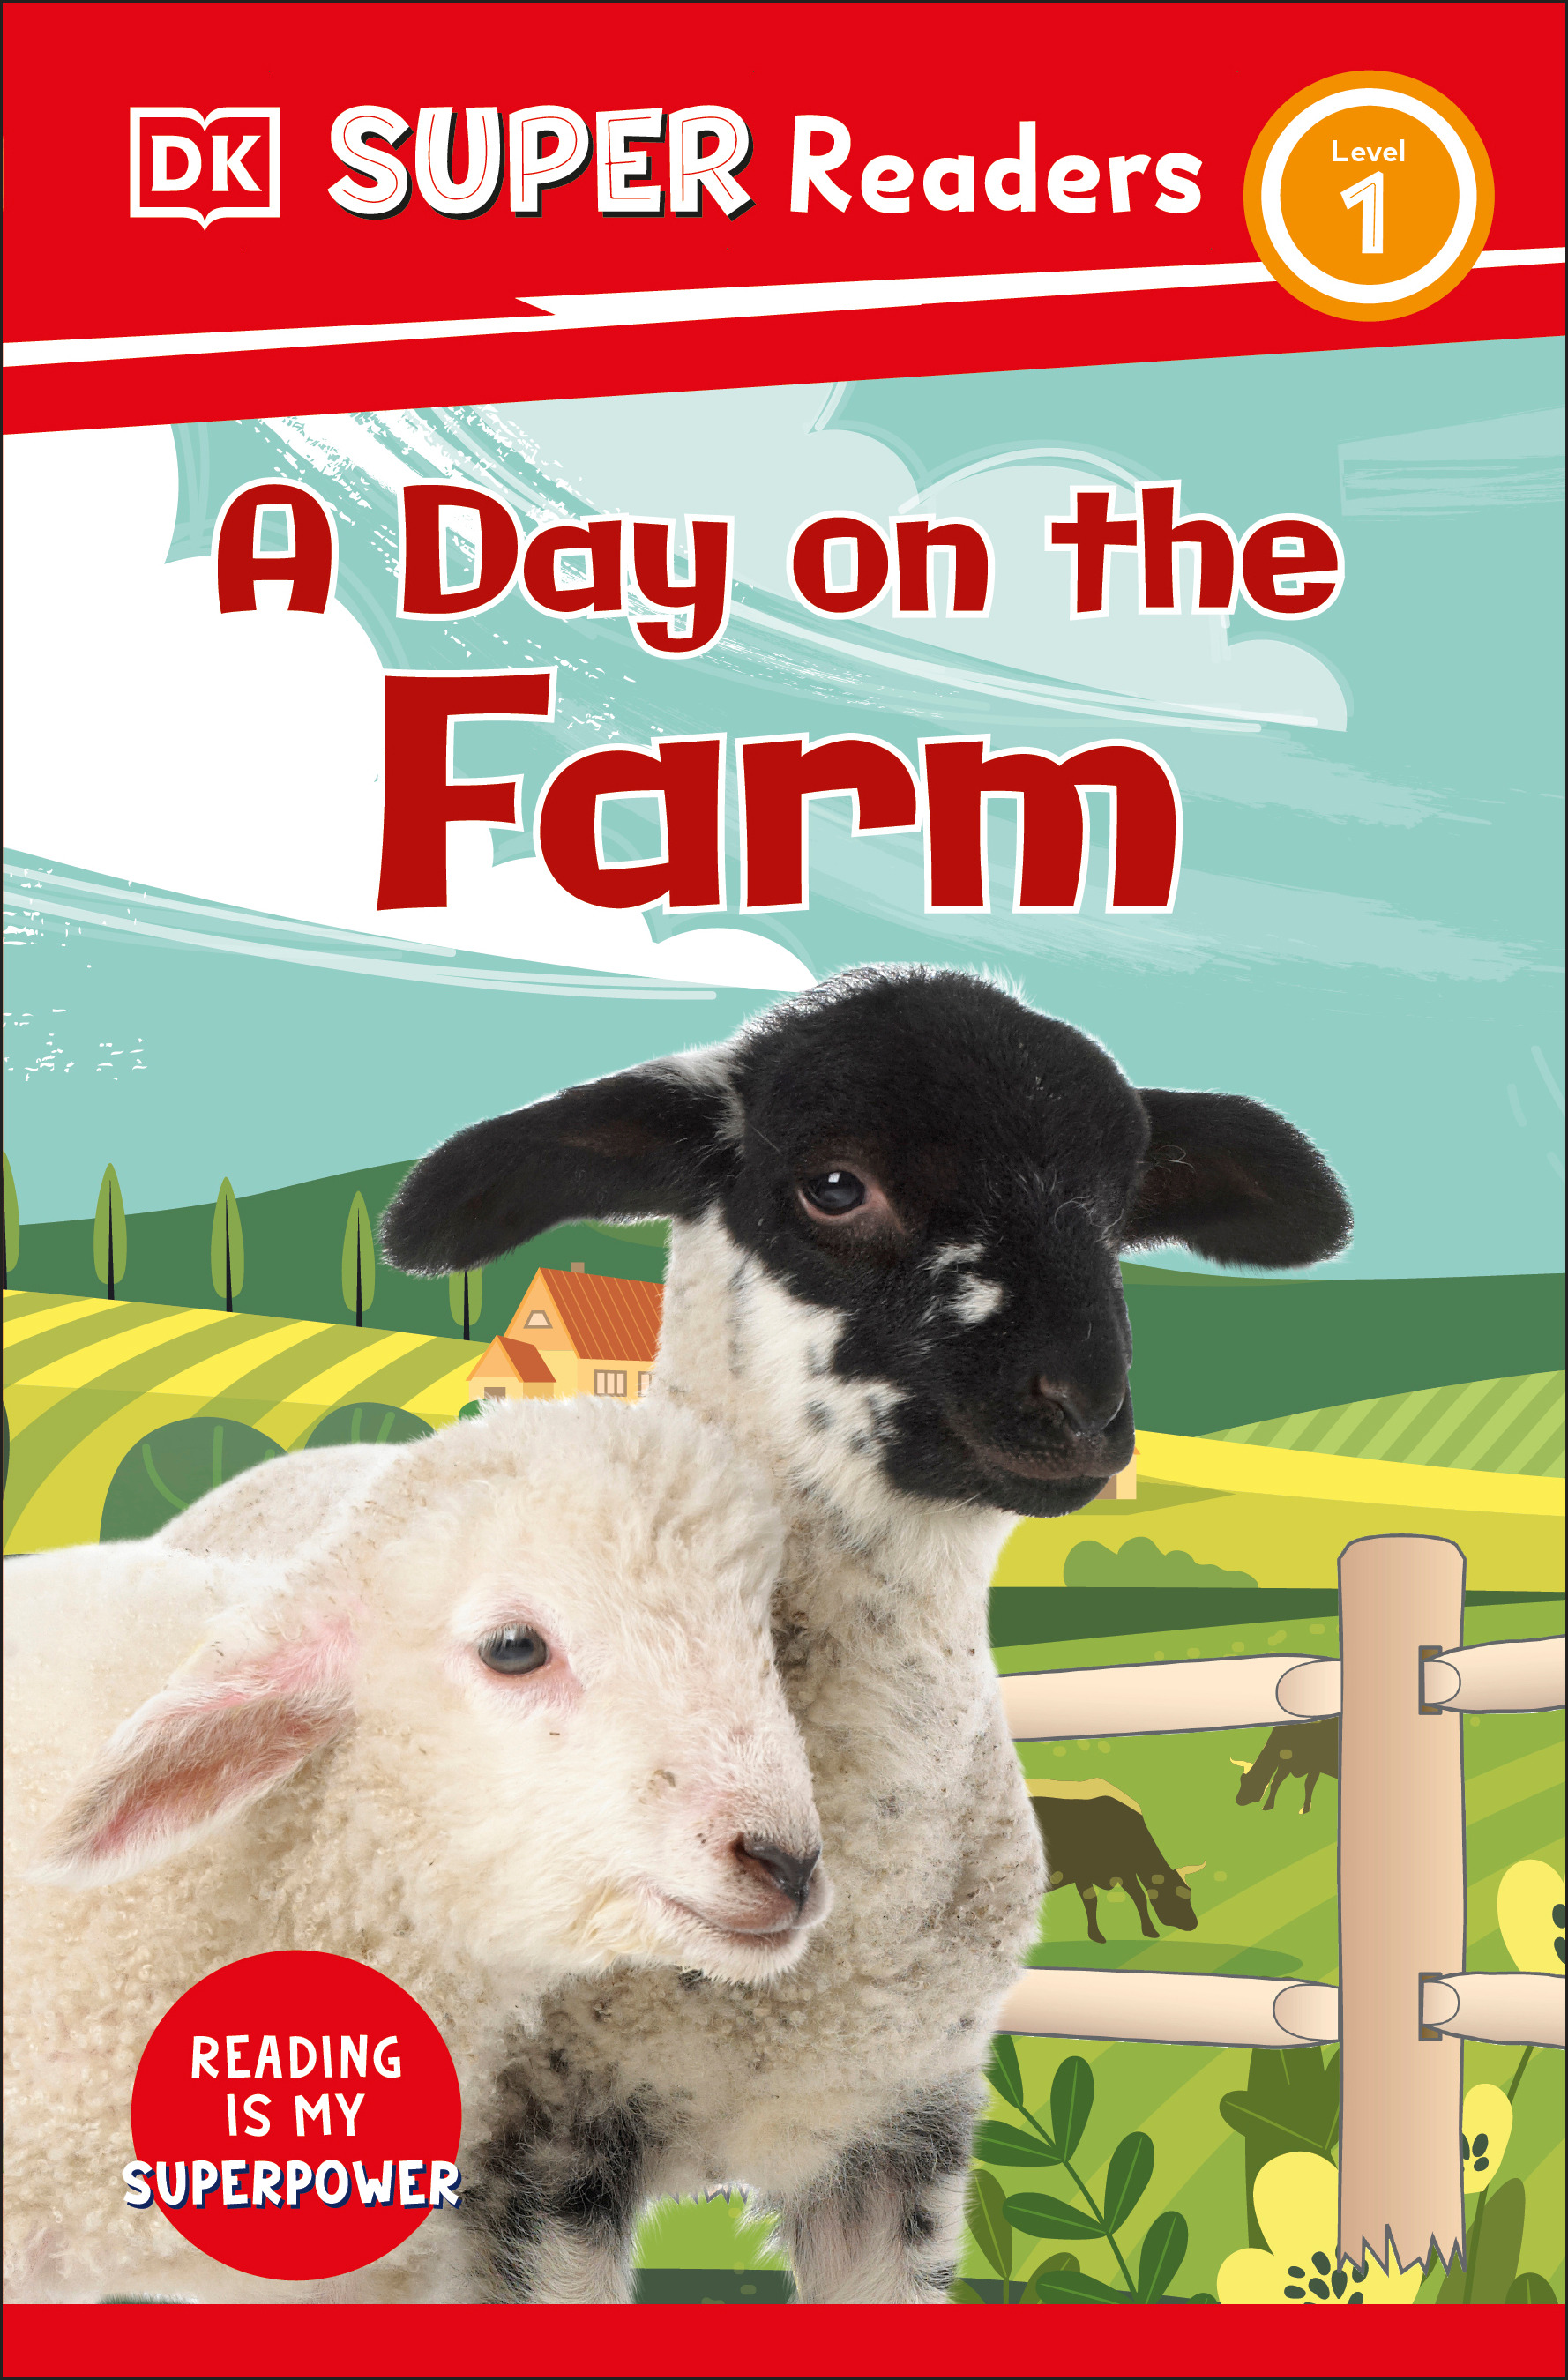 DK Super Readers Level 1 - A Day on the Farm | 